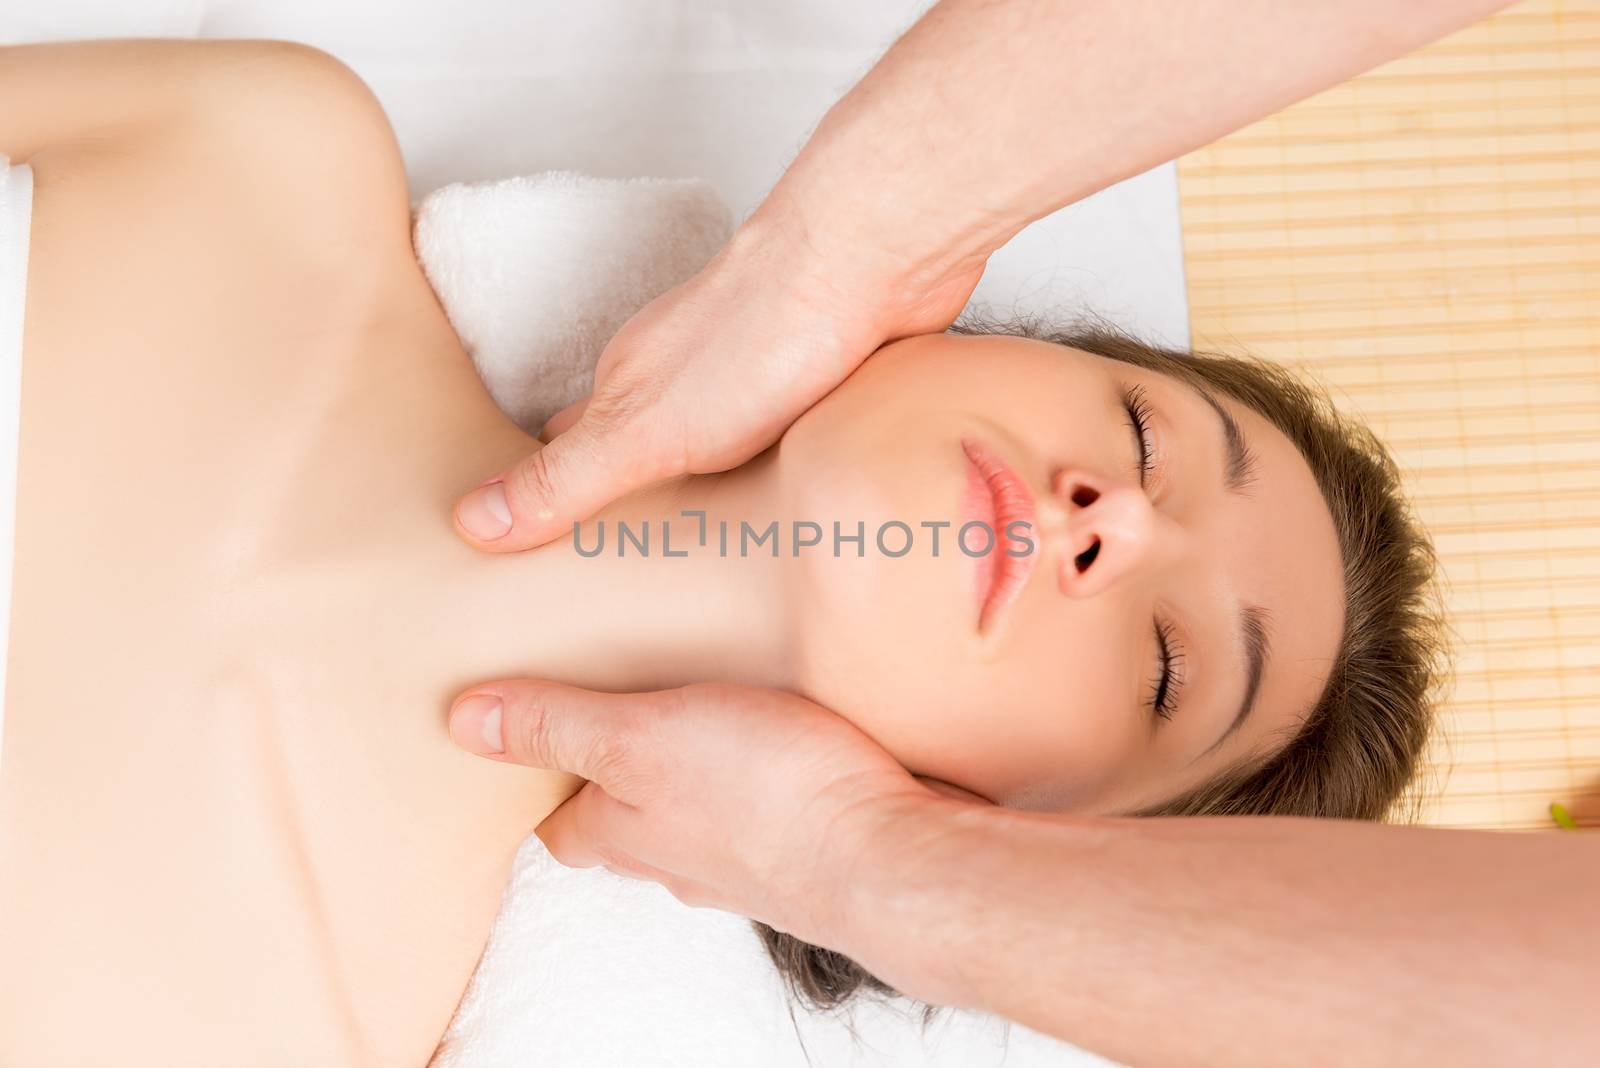 male hands on a female professional masseur neck and shoulders close-up